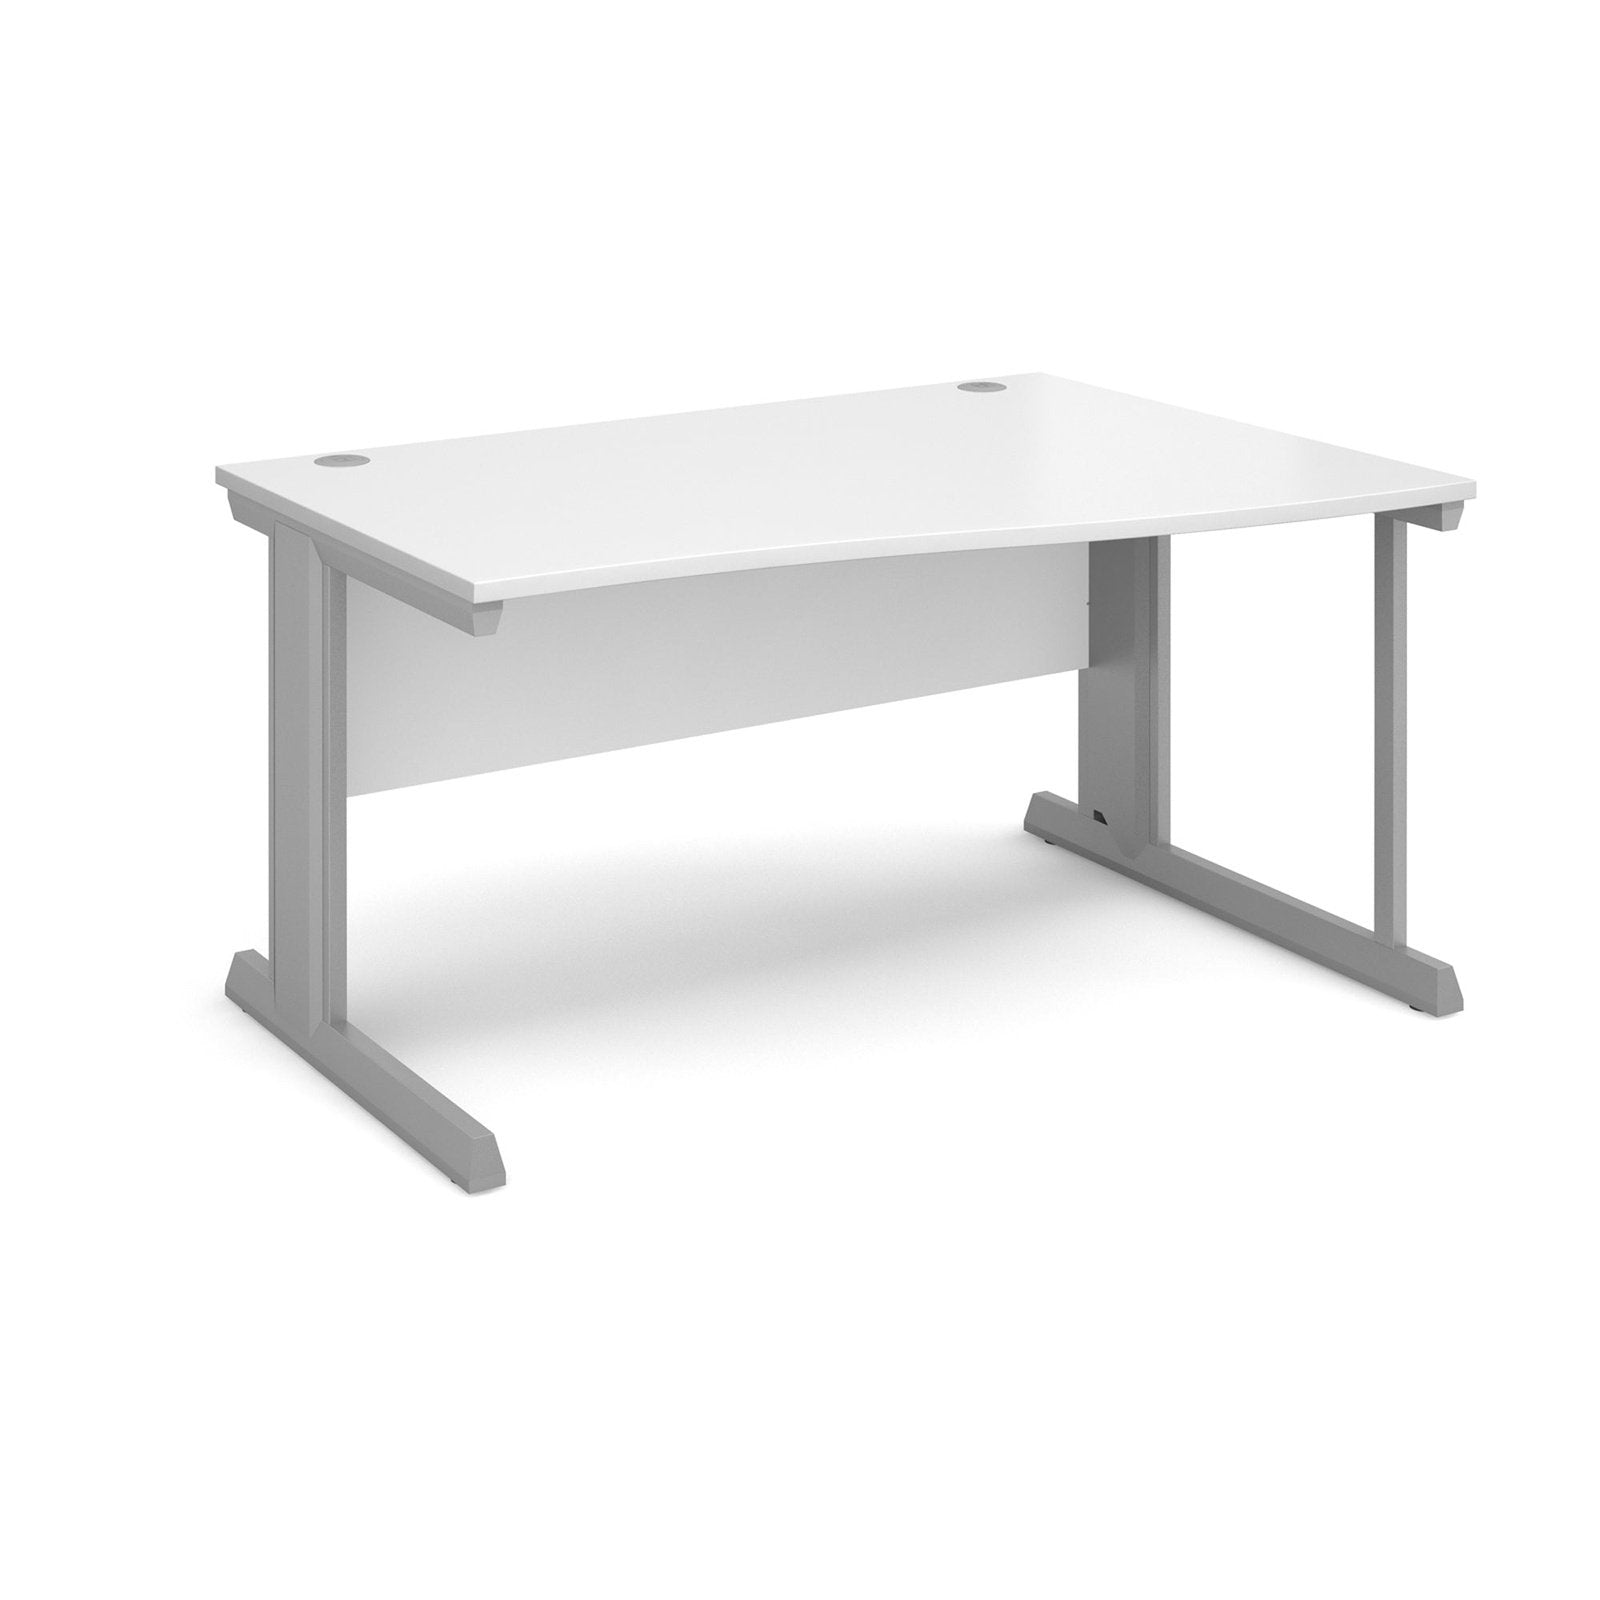 Vivo right hand wave desk - Office Products Online